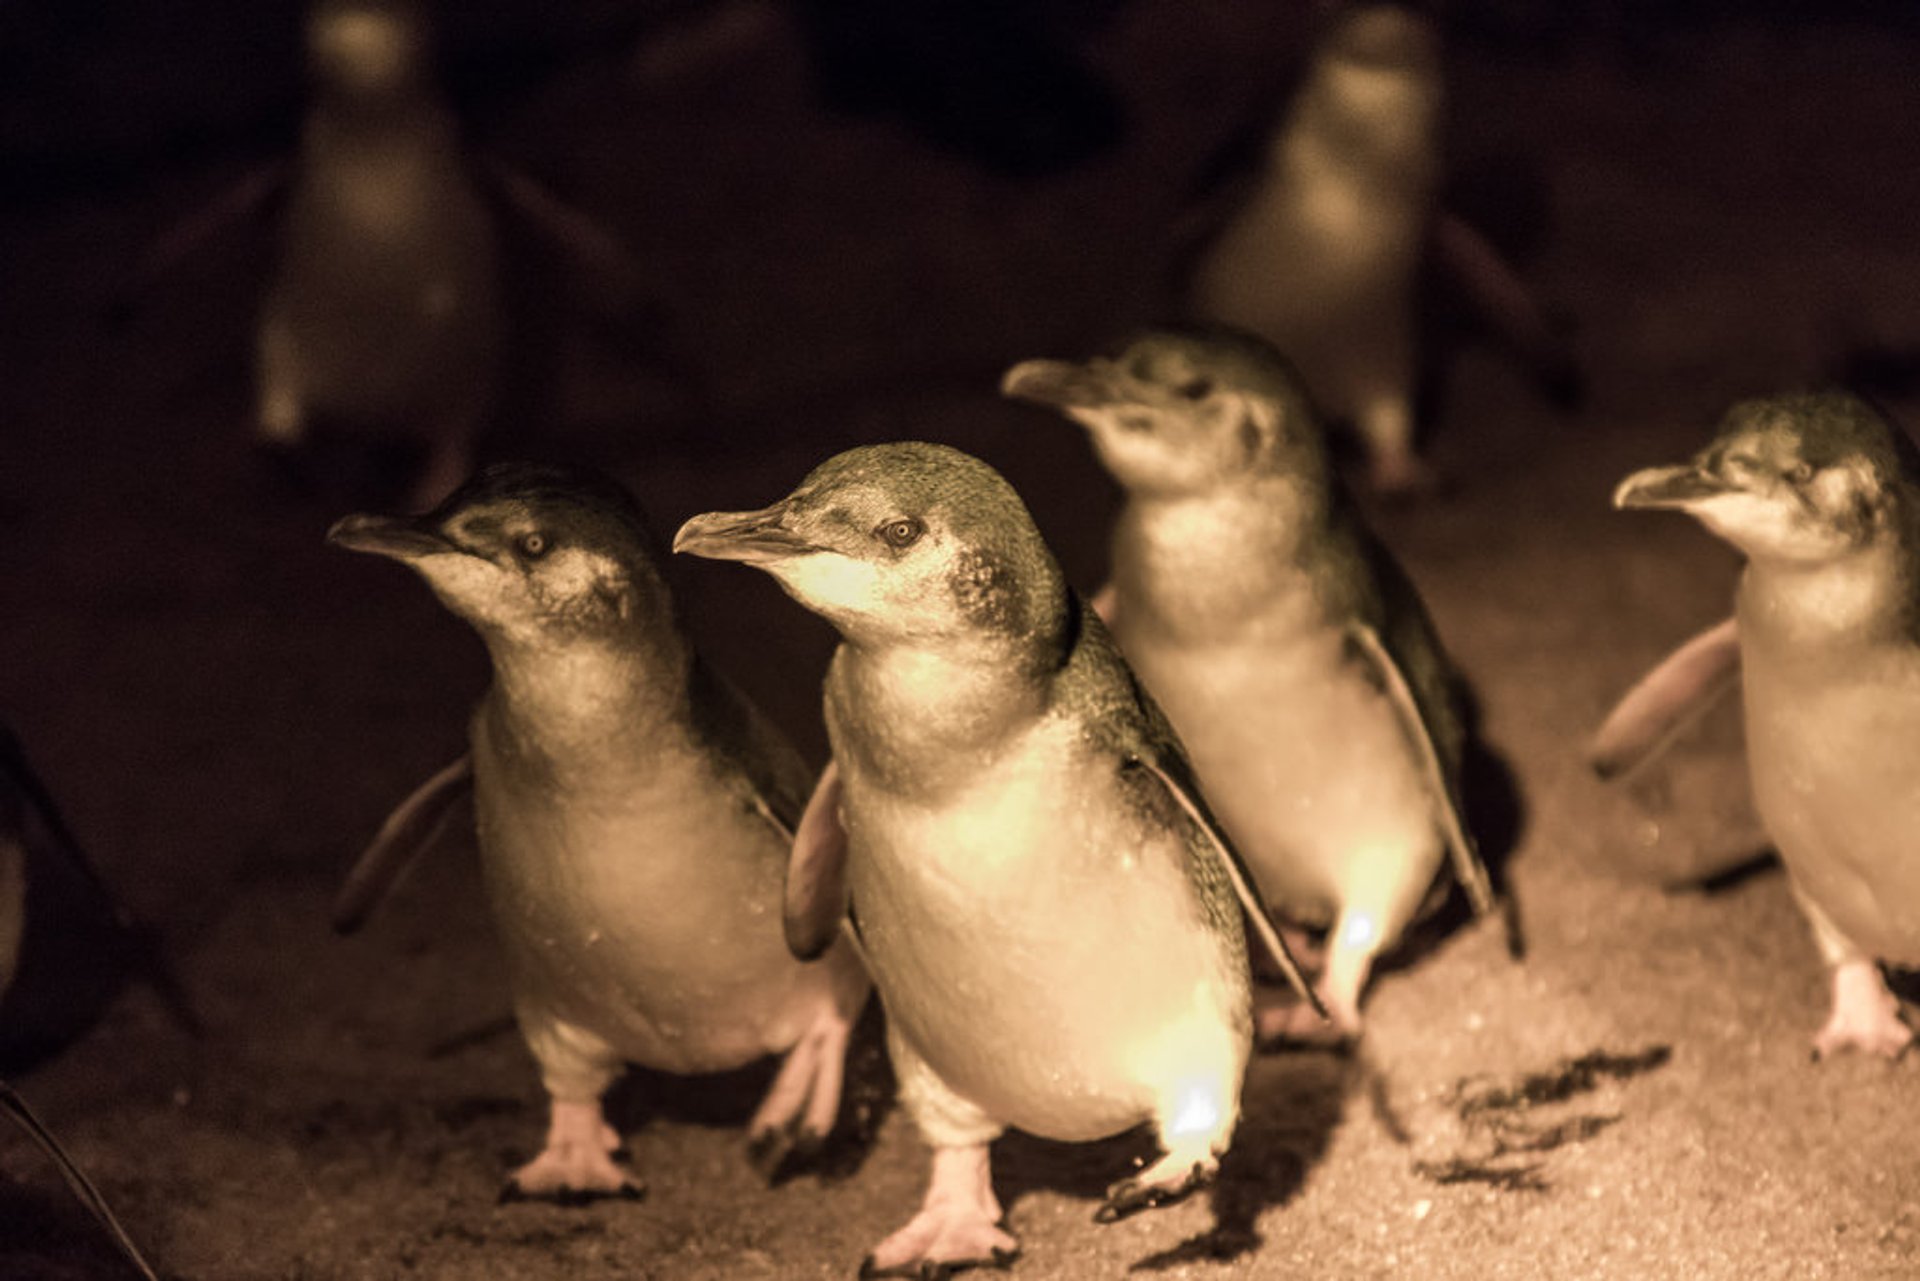 Watching World Smallest Penguins